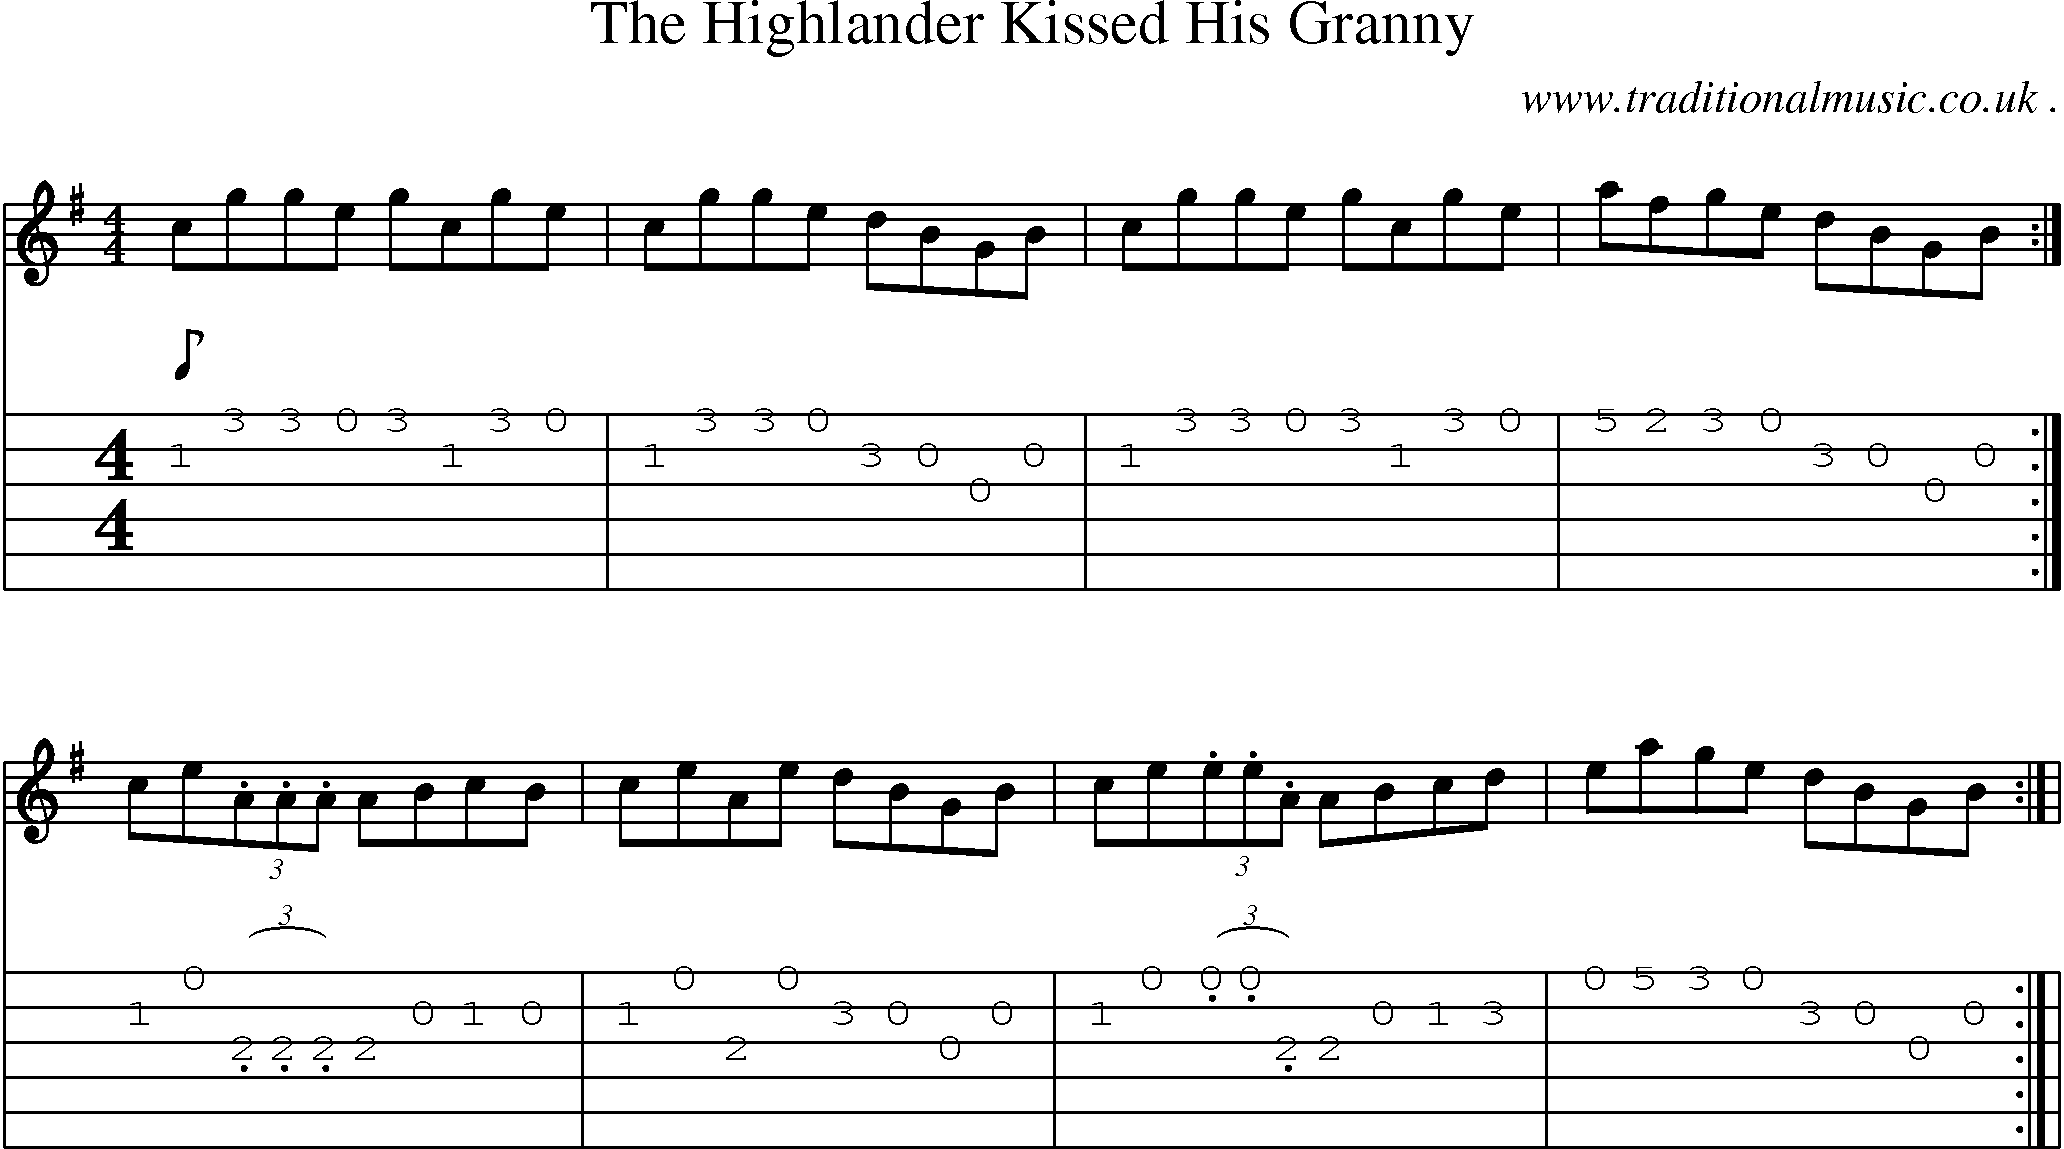 Sheet-Music and Guitar Tabs for The Highlander Kissed His Granny